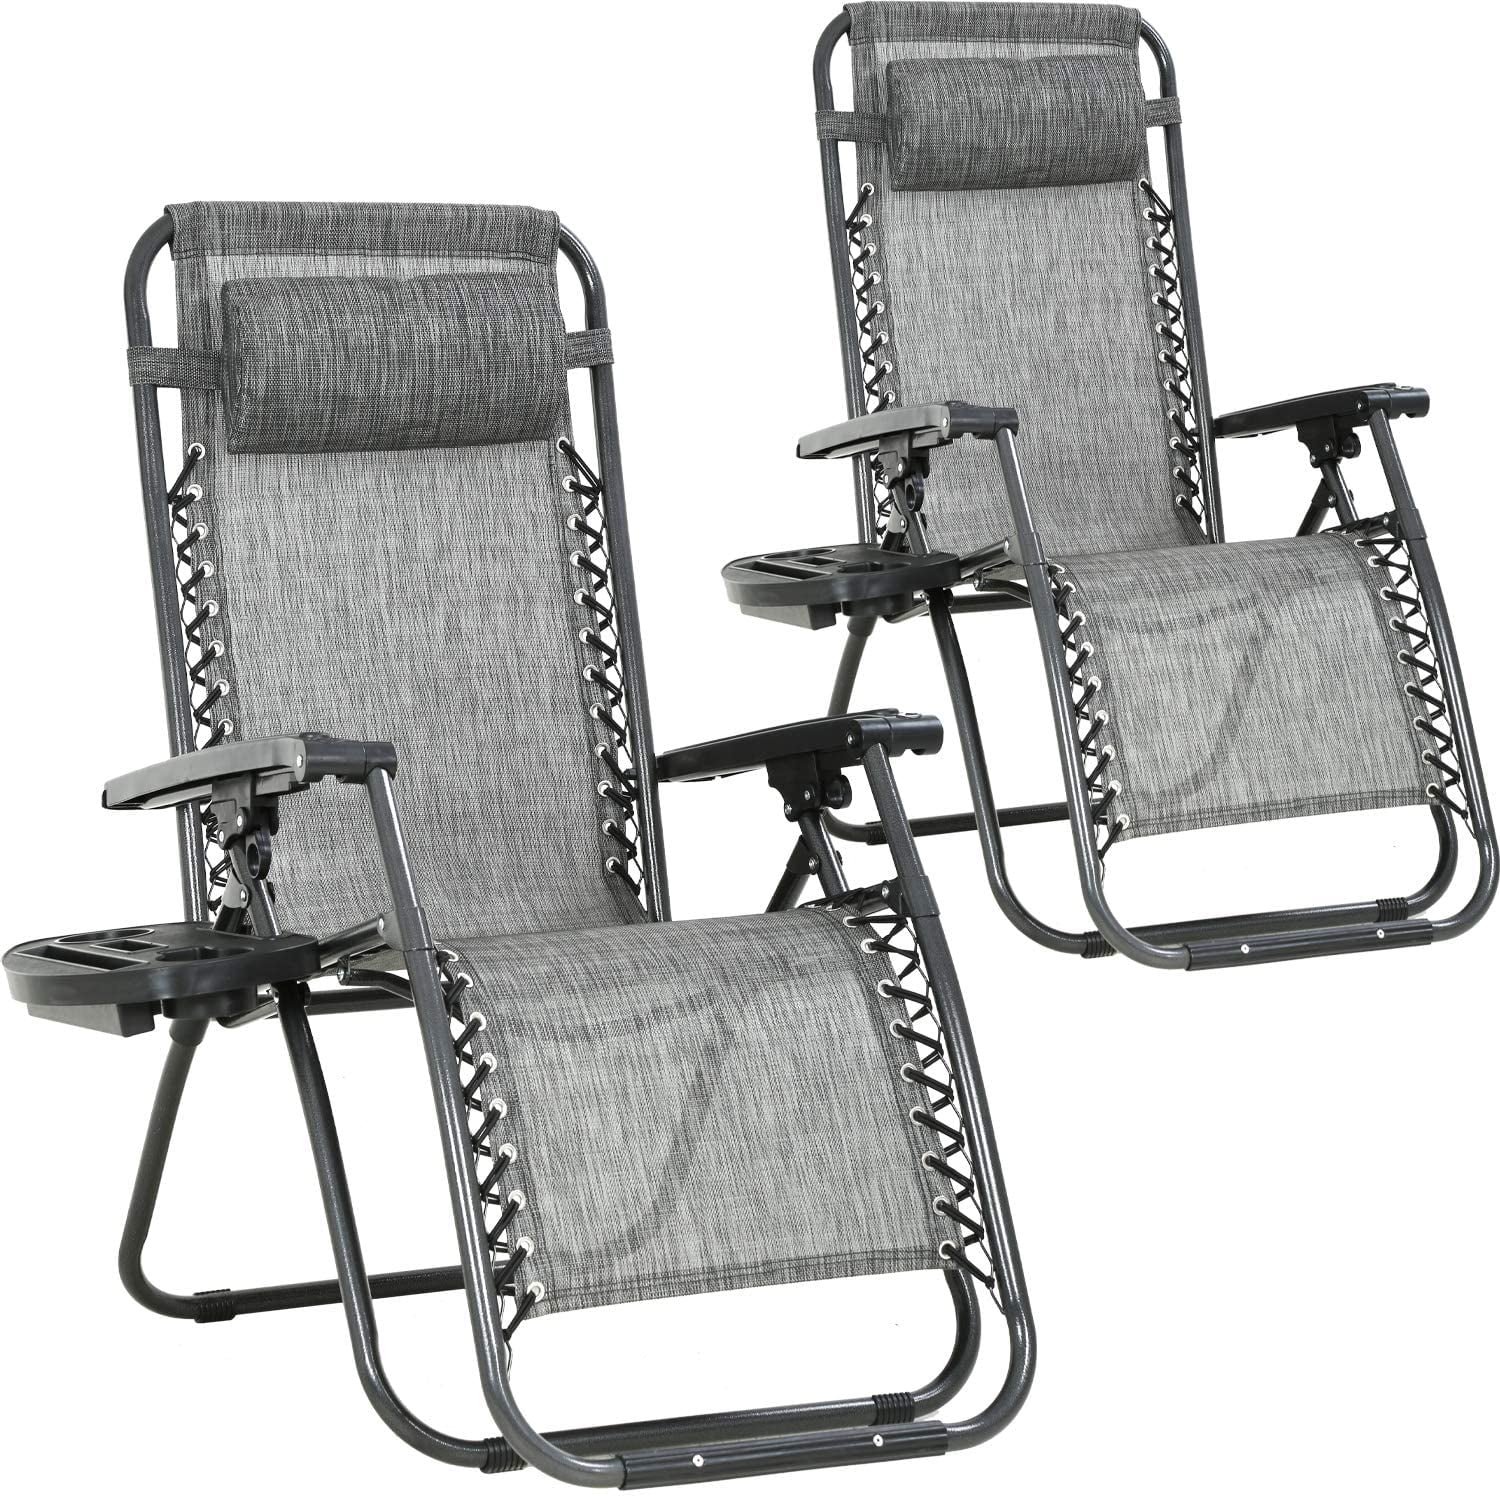 Zero Gravity Chair Patio Chairs Set of 2 Lawn Chair Outdoor